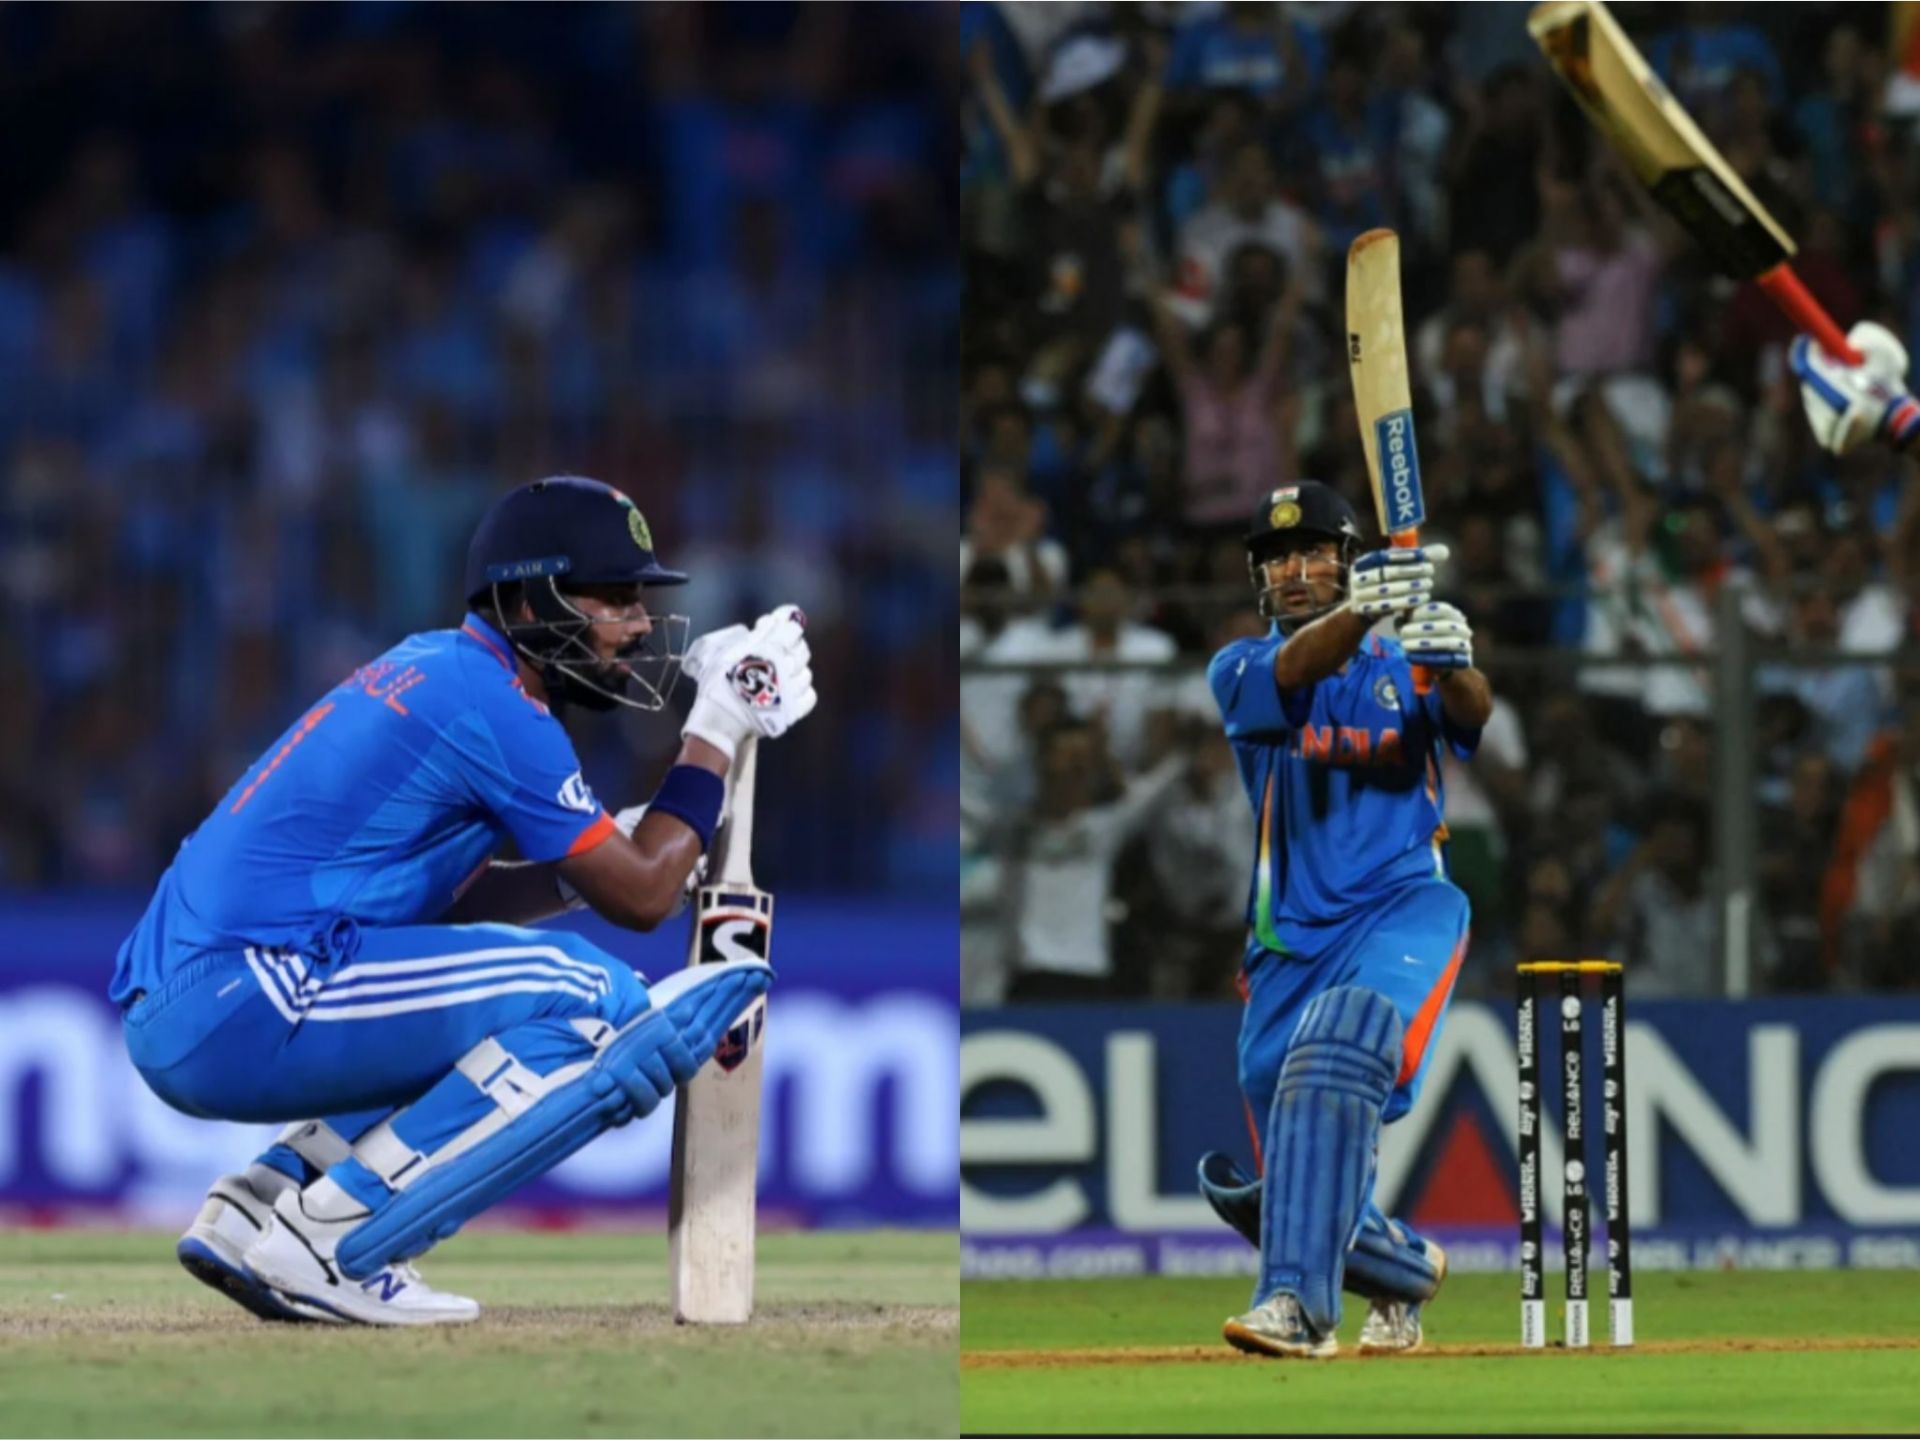 Both KL Rahul and MS Dhoni finished the innings with maximums [Getty Images]